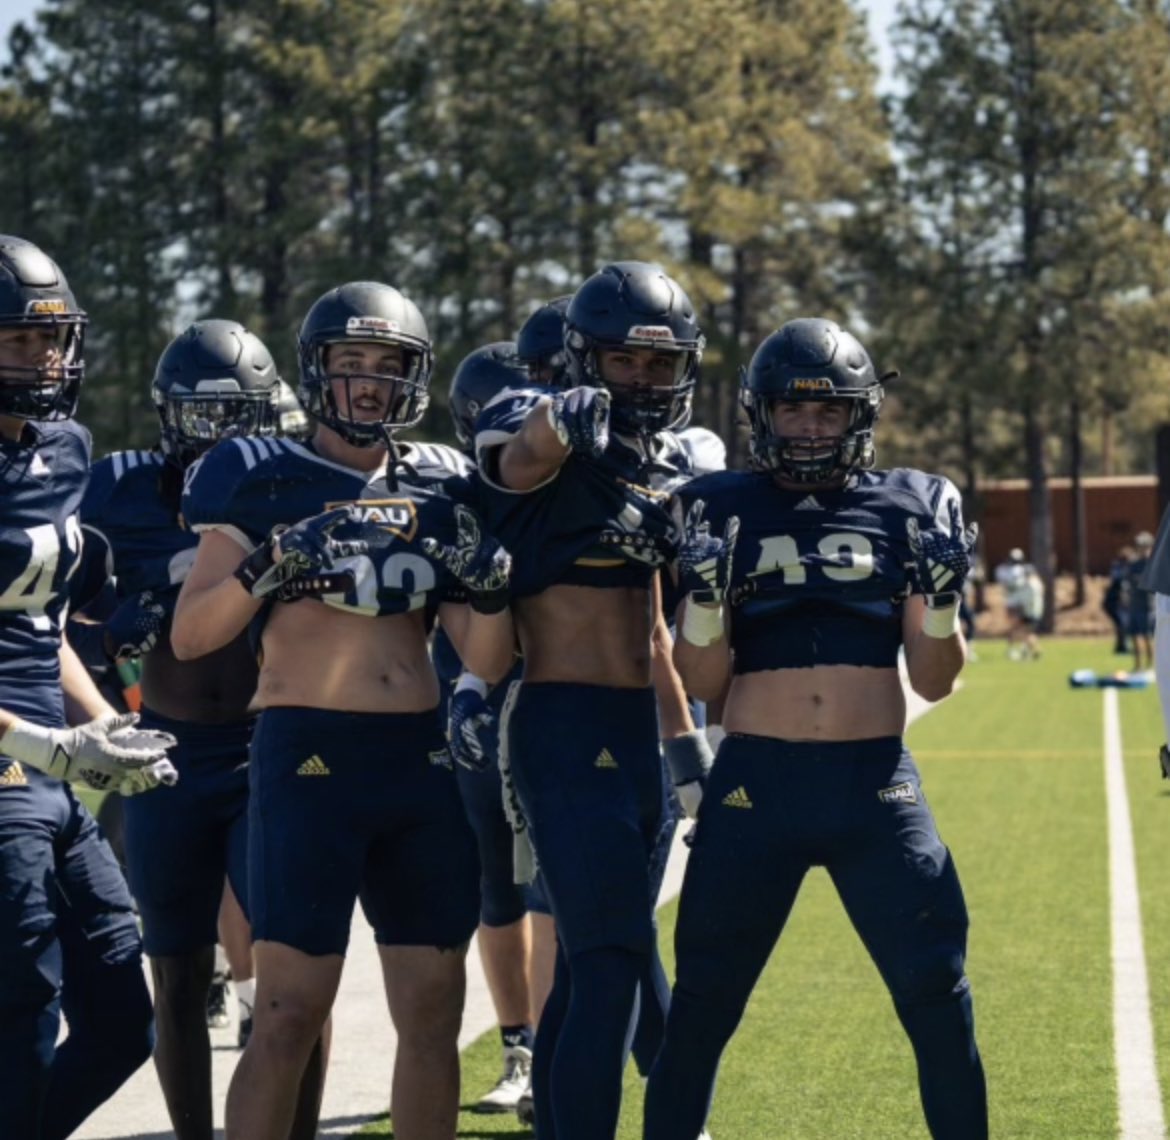 Good luck to two former 🐻’s @J_Browning5 and @robinson_ty21 as they compete this spring for @NAU_Football !! 🐻💪 That’s 4 total 🐻’s up in Flagstaff right now!! @BashaAthletics @MarquesReischl